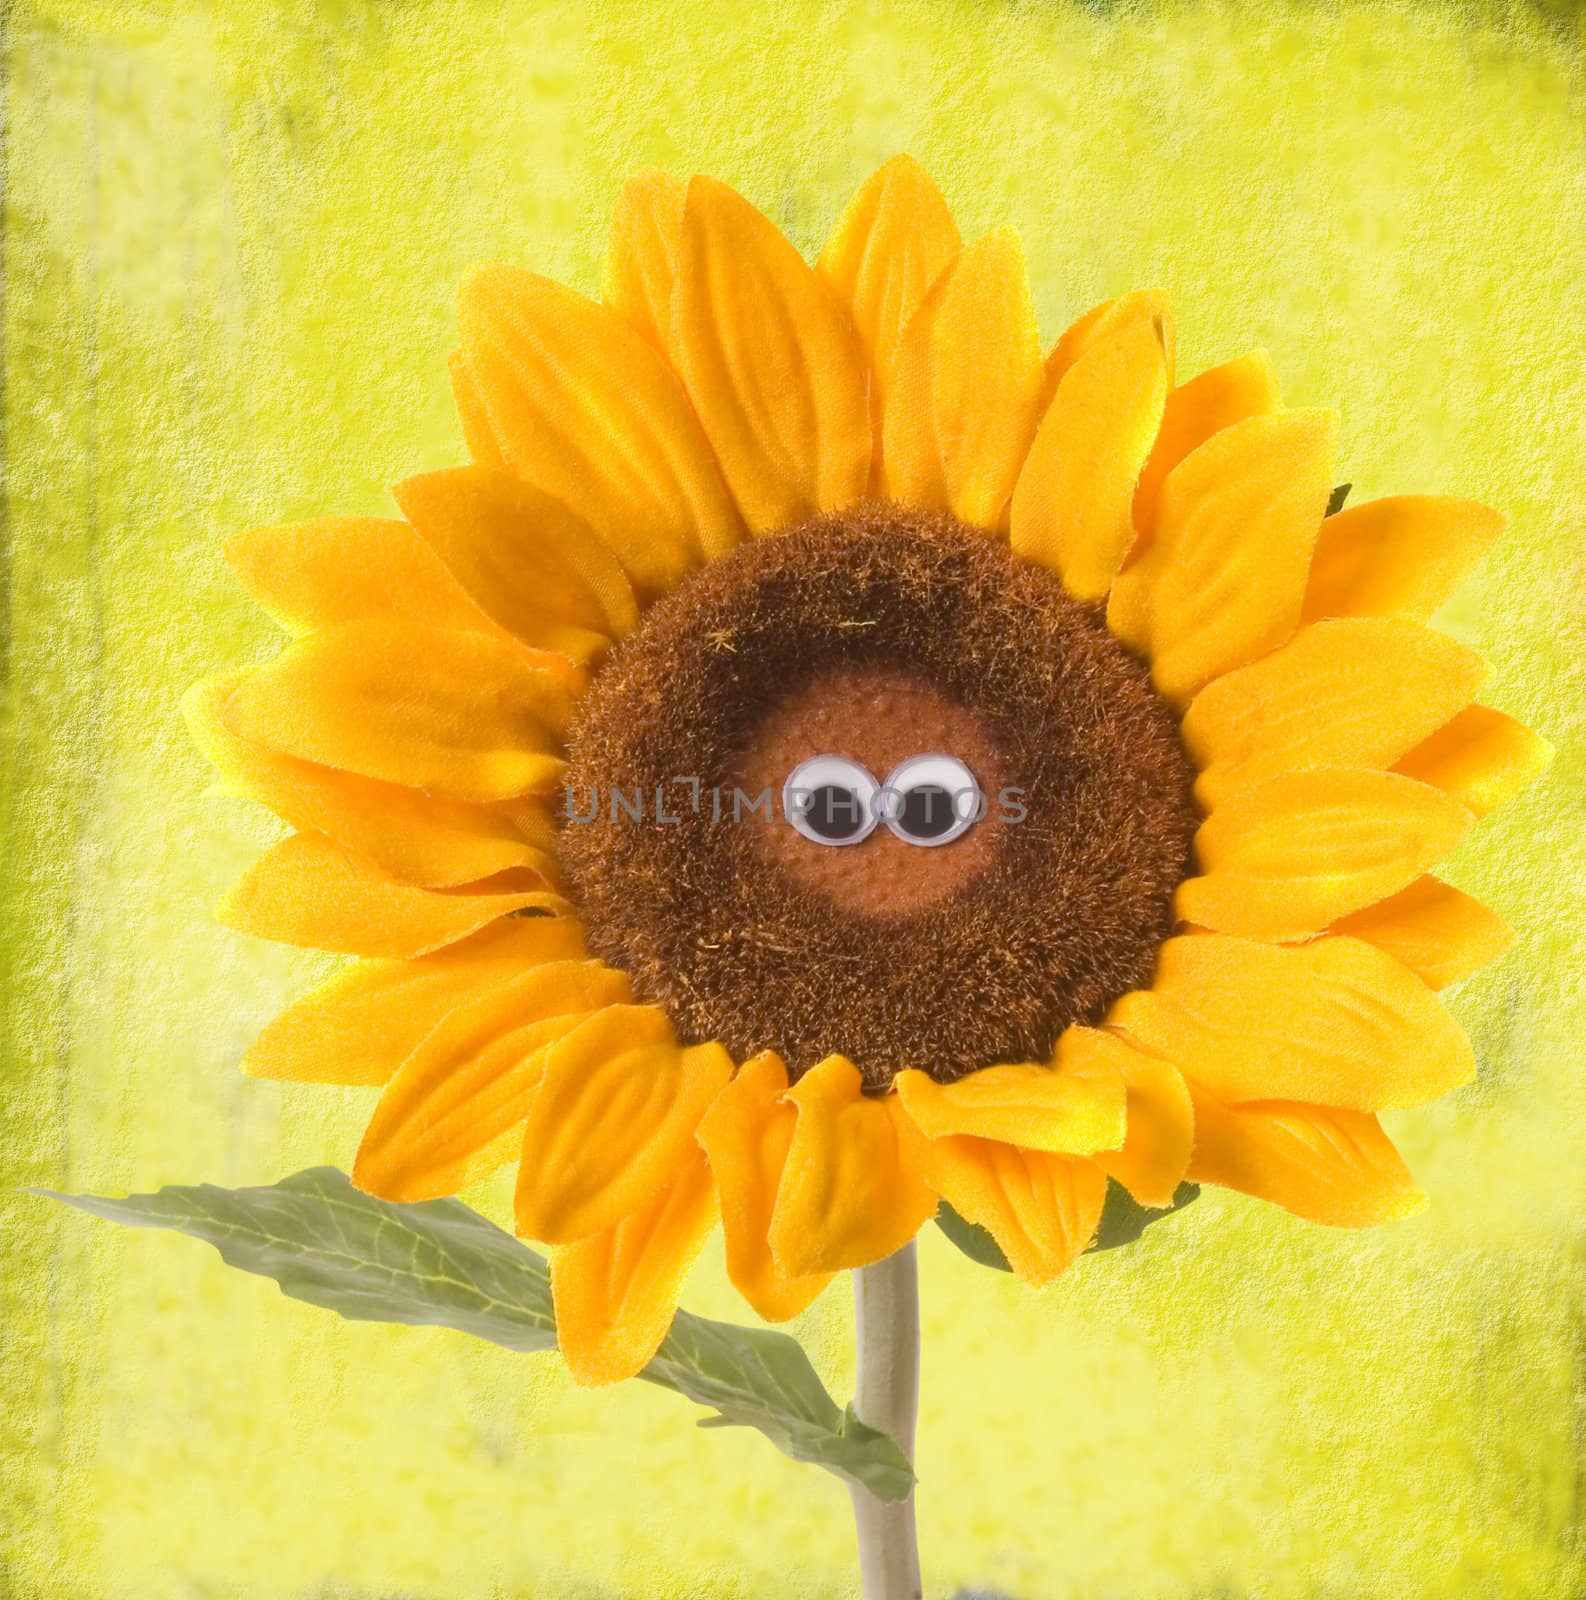  sunflower eyes on a yellow background 